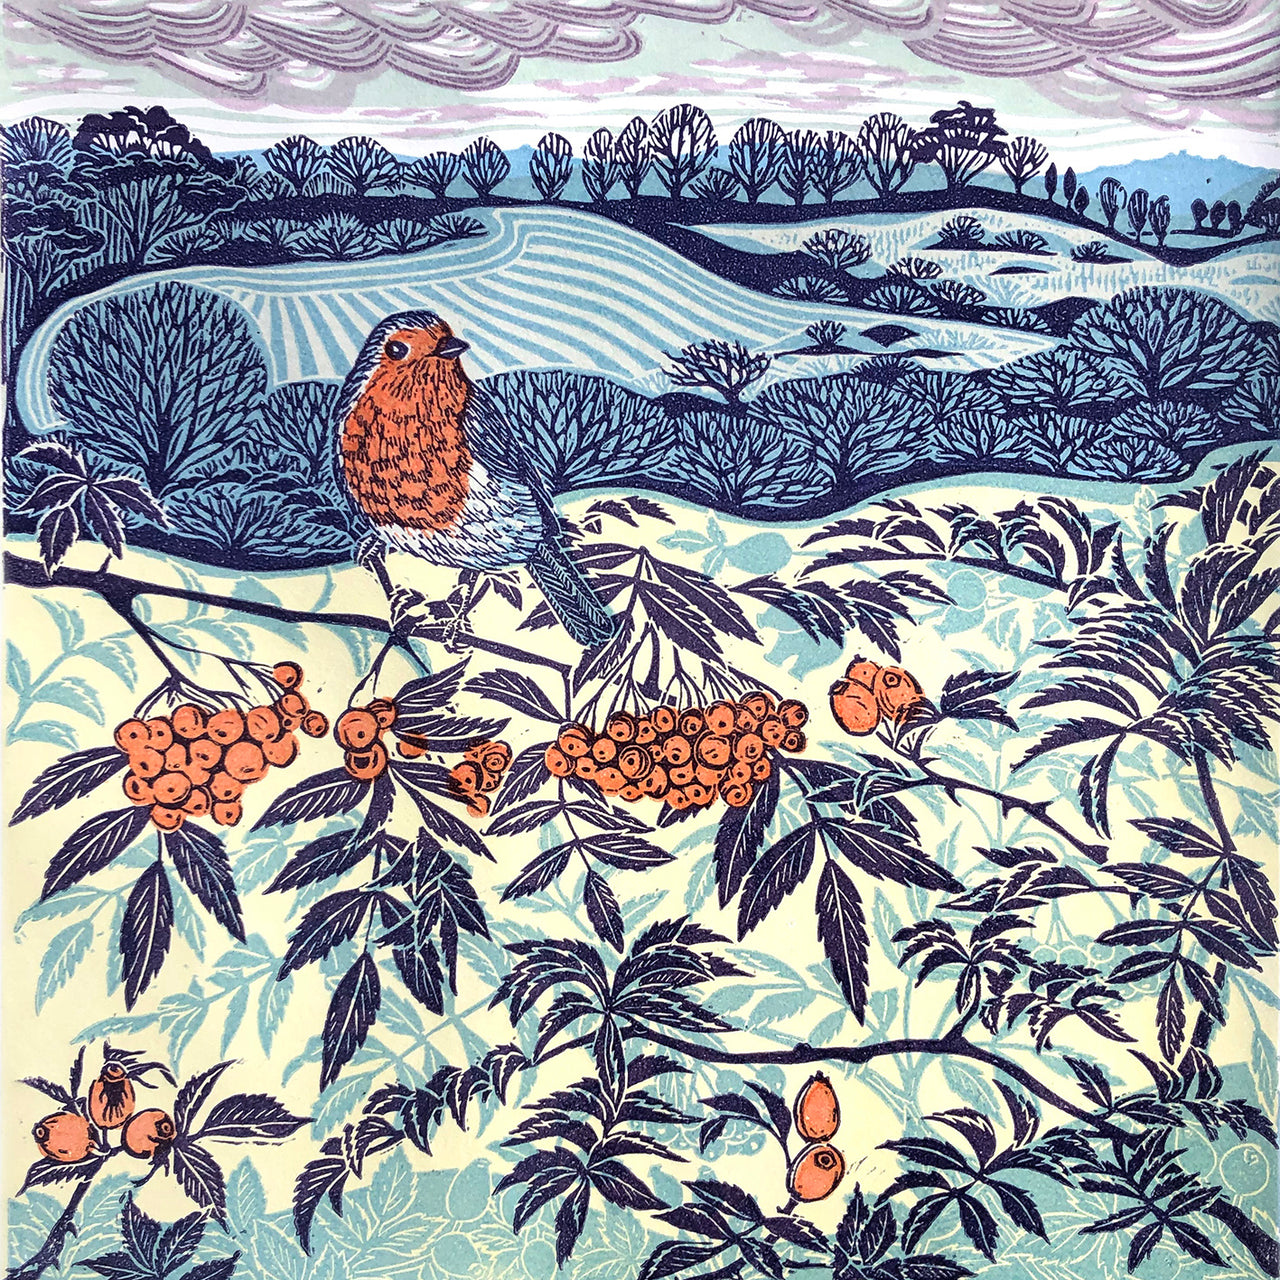 Framed lino print in blue tones with orange of robin sitting on a branch in the foreground and fields and trees in the background by Cornish artist Claire Armitage.